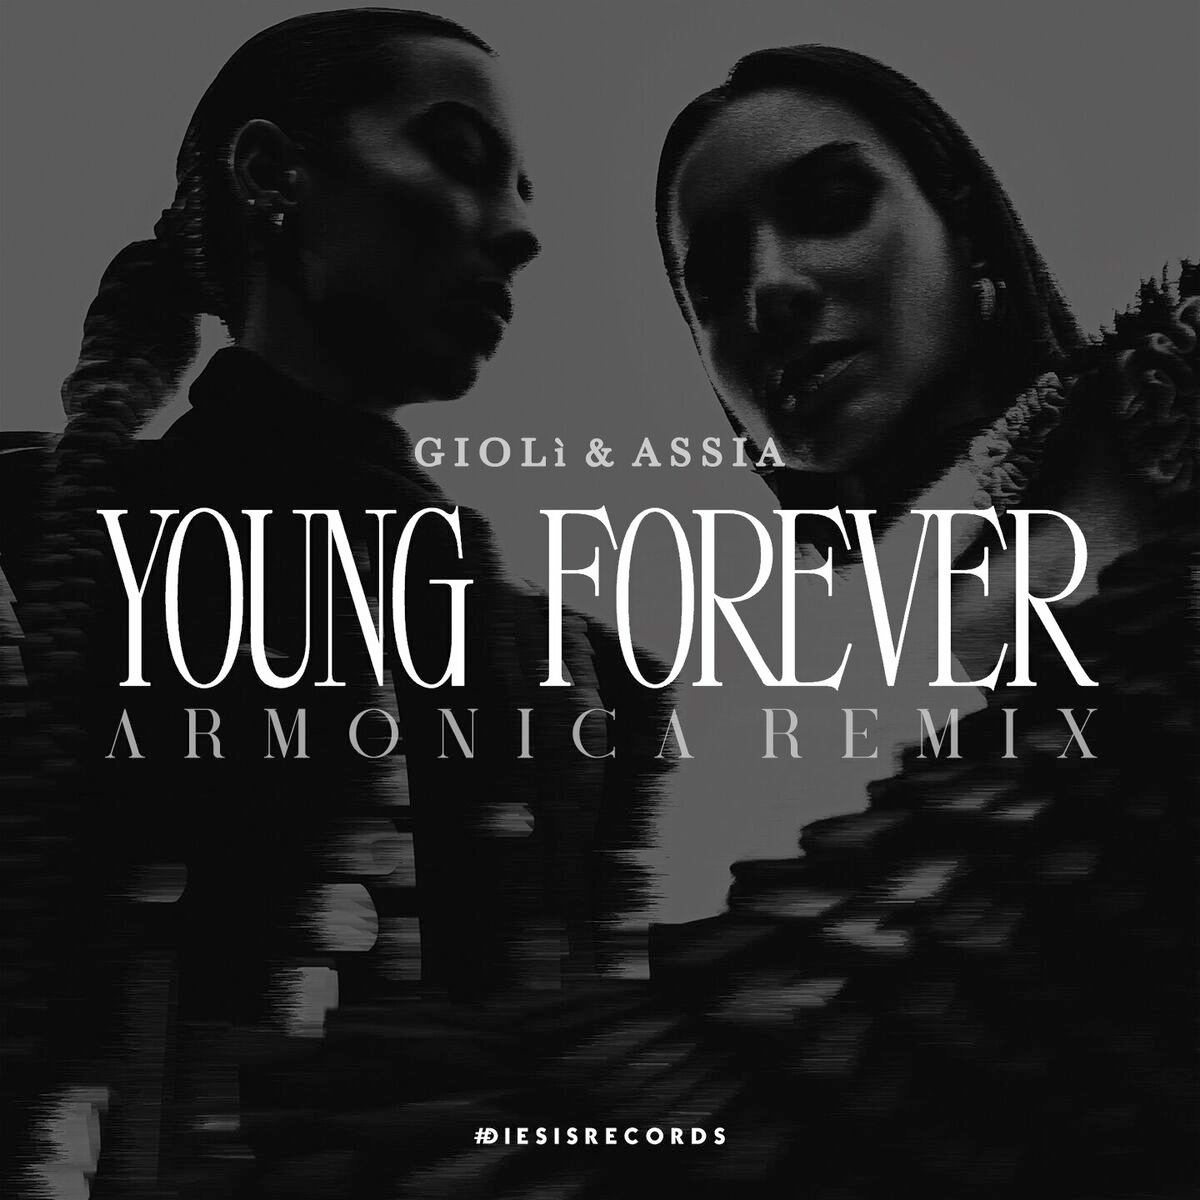 Giolì & Assia - Young Forever (Armonica Extended Remix)